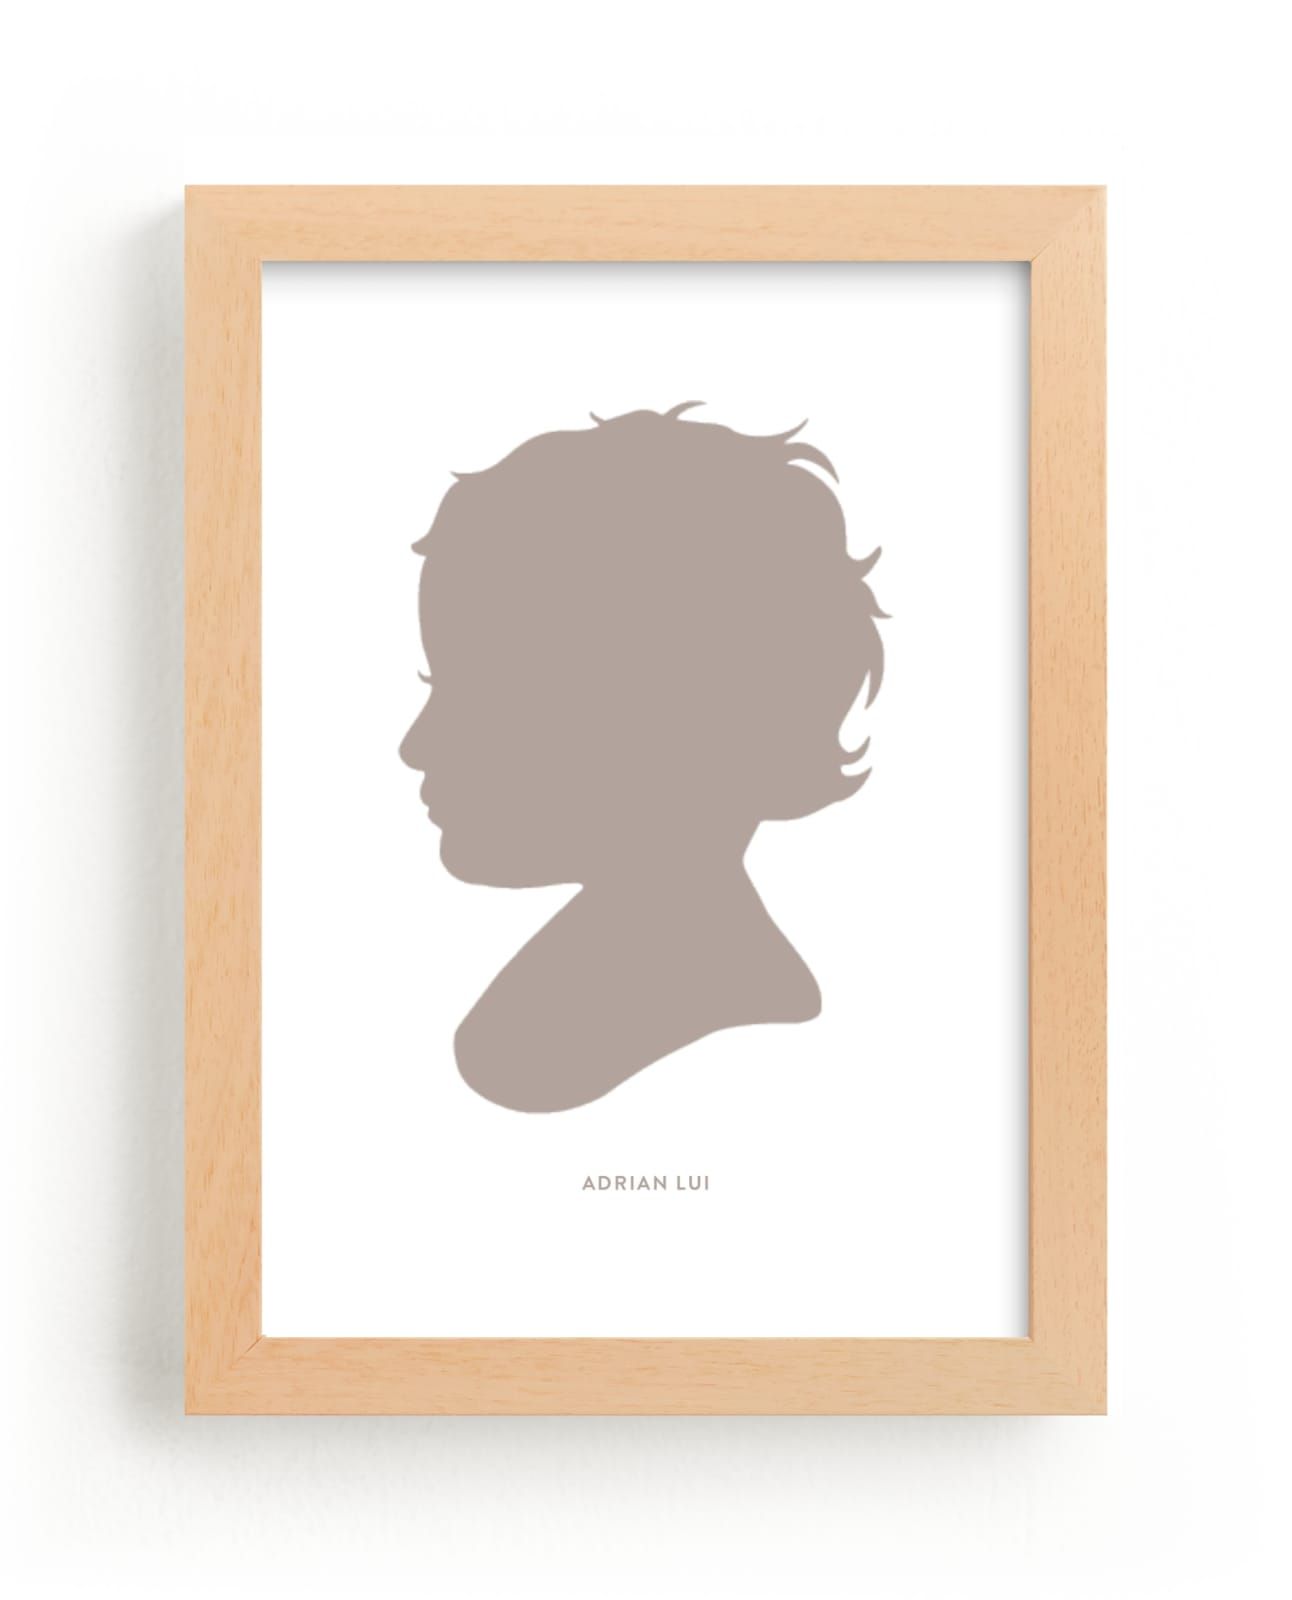 "Custom Silhouette Art" - Completely Custom Silhouette Art by Minted. | Minted